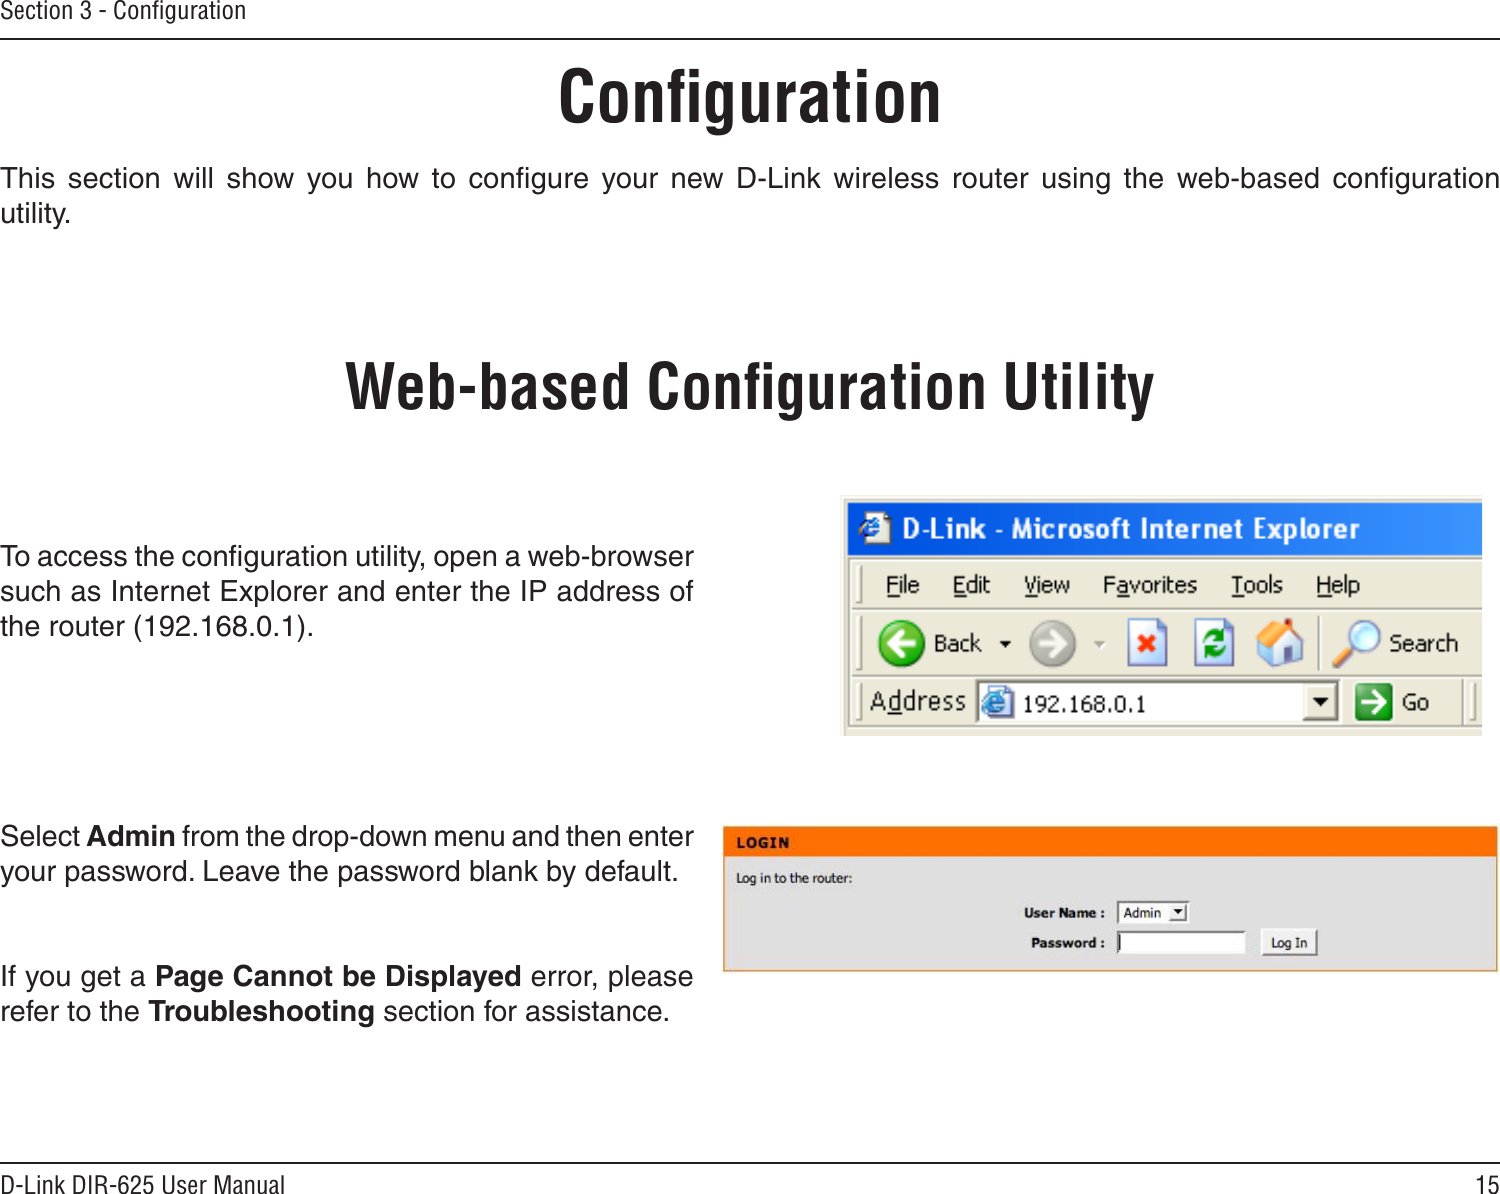 15D-Link DIR-625 User ManualSection 3 - ConﬁgurationConﬁgurationThis  section  will  show  you  how  to  conﬁgure  your  new  D-Link  wireless  router  using  the  web-based  conﬁguration utility.Web-based Conﬁguration UtilityTo access the conﬁguration utility, open a web-browser such as Internet Explorer and enter the IP address of the router (192.168.0.1).Select Admin from the drop-down menu and then enter your password. Leave the password blank by default.If you get a Page Cannot be Displayed error, please refer to the Troubleshooting section for assistance.